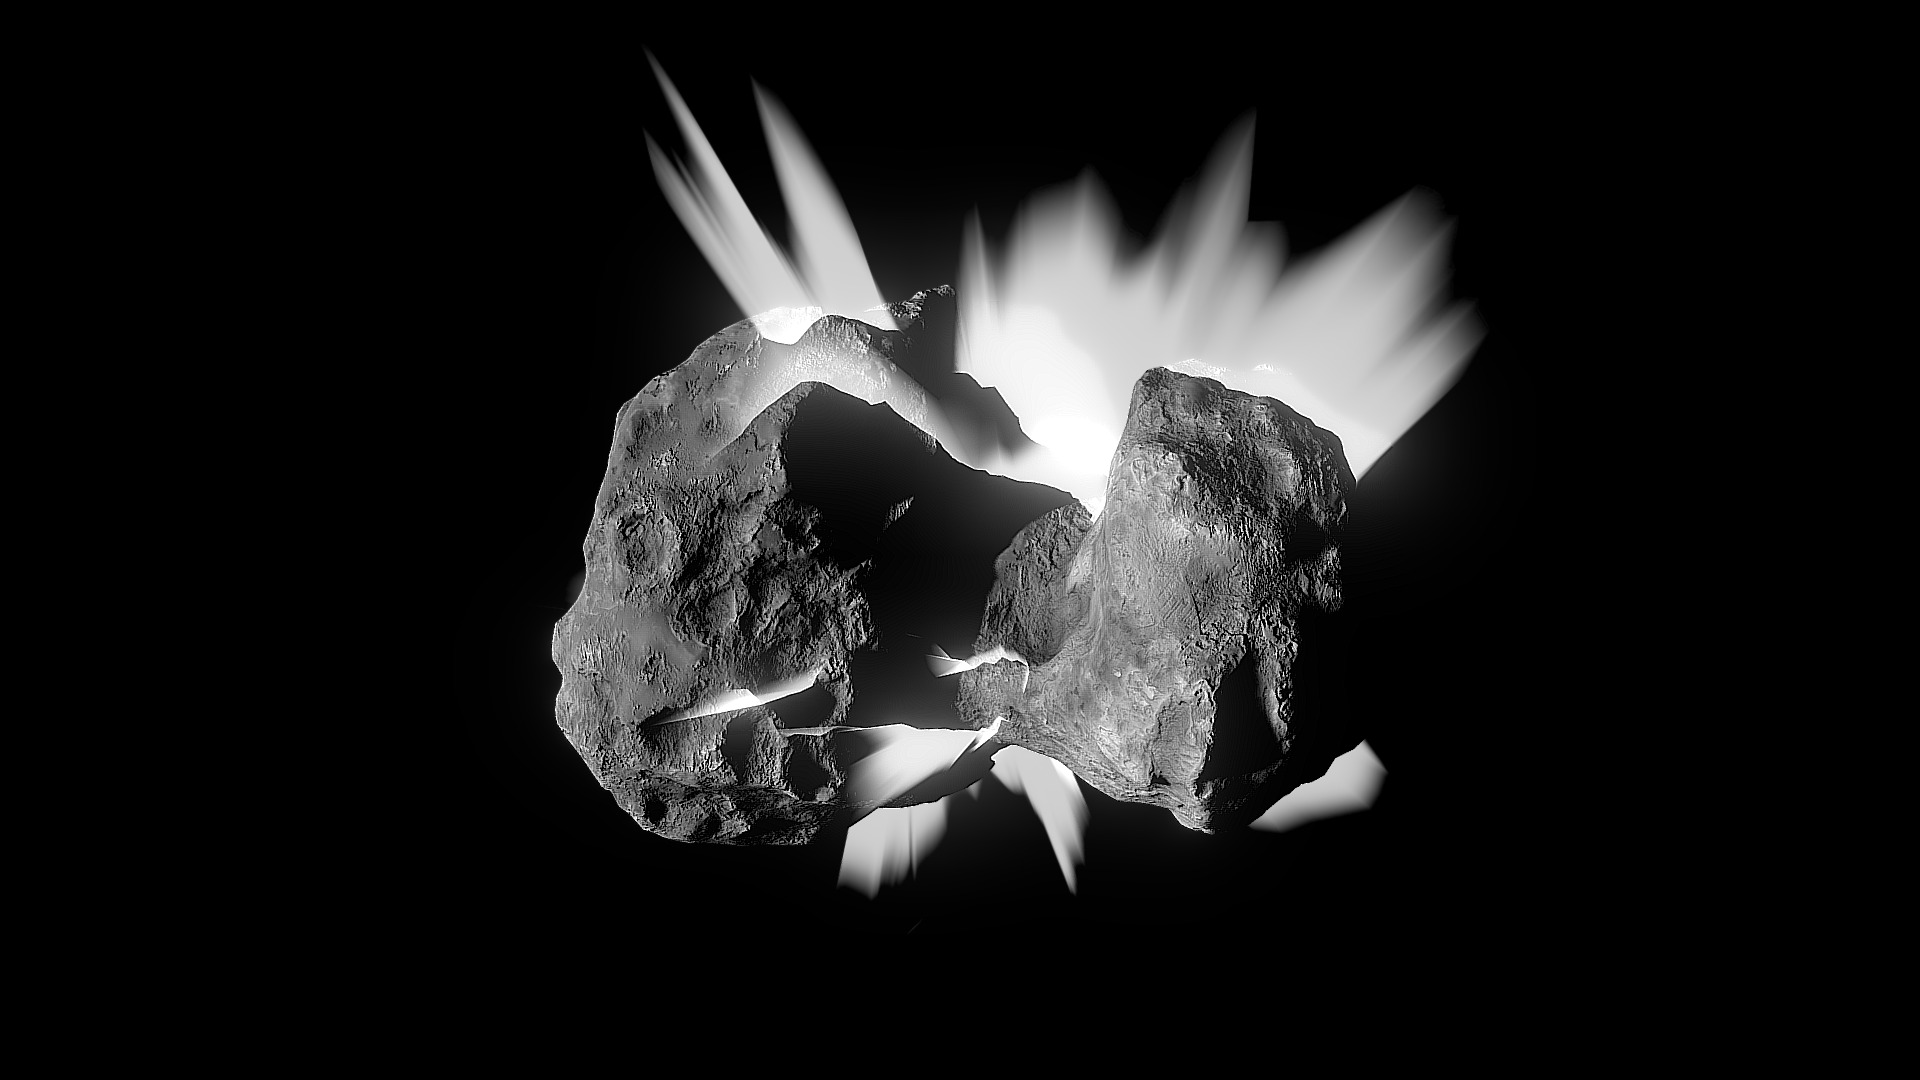 3D model 67P/Churyumov-Gerasimenko comet - This is a 3D model of the 67P/Churyumov-Gerasimenko comet. The 3D model is about a close-up of a skull.